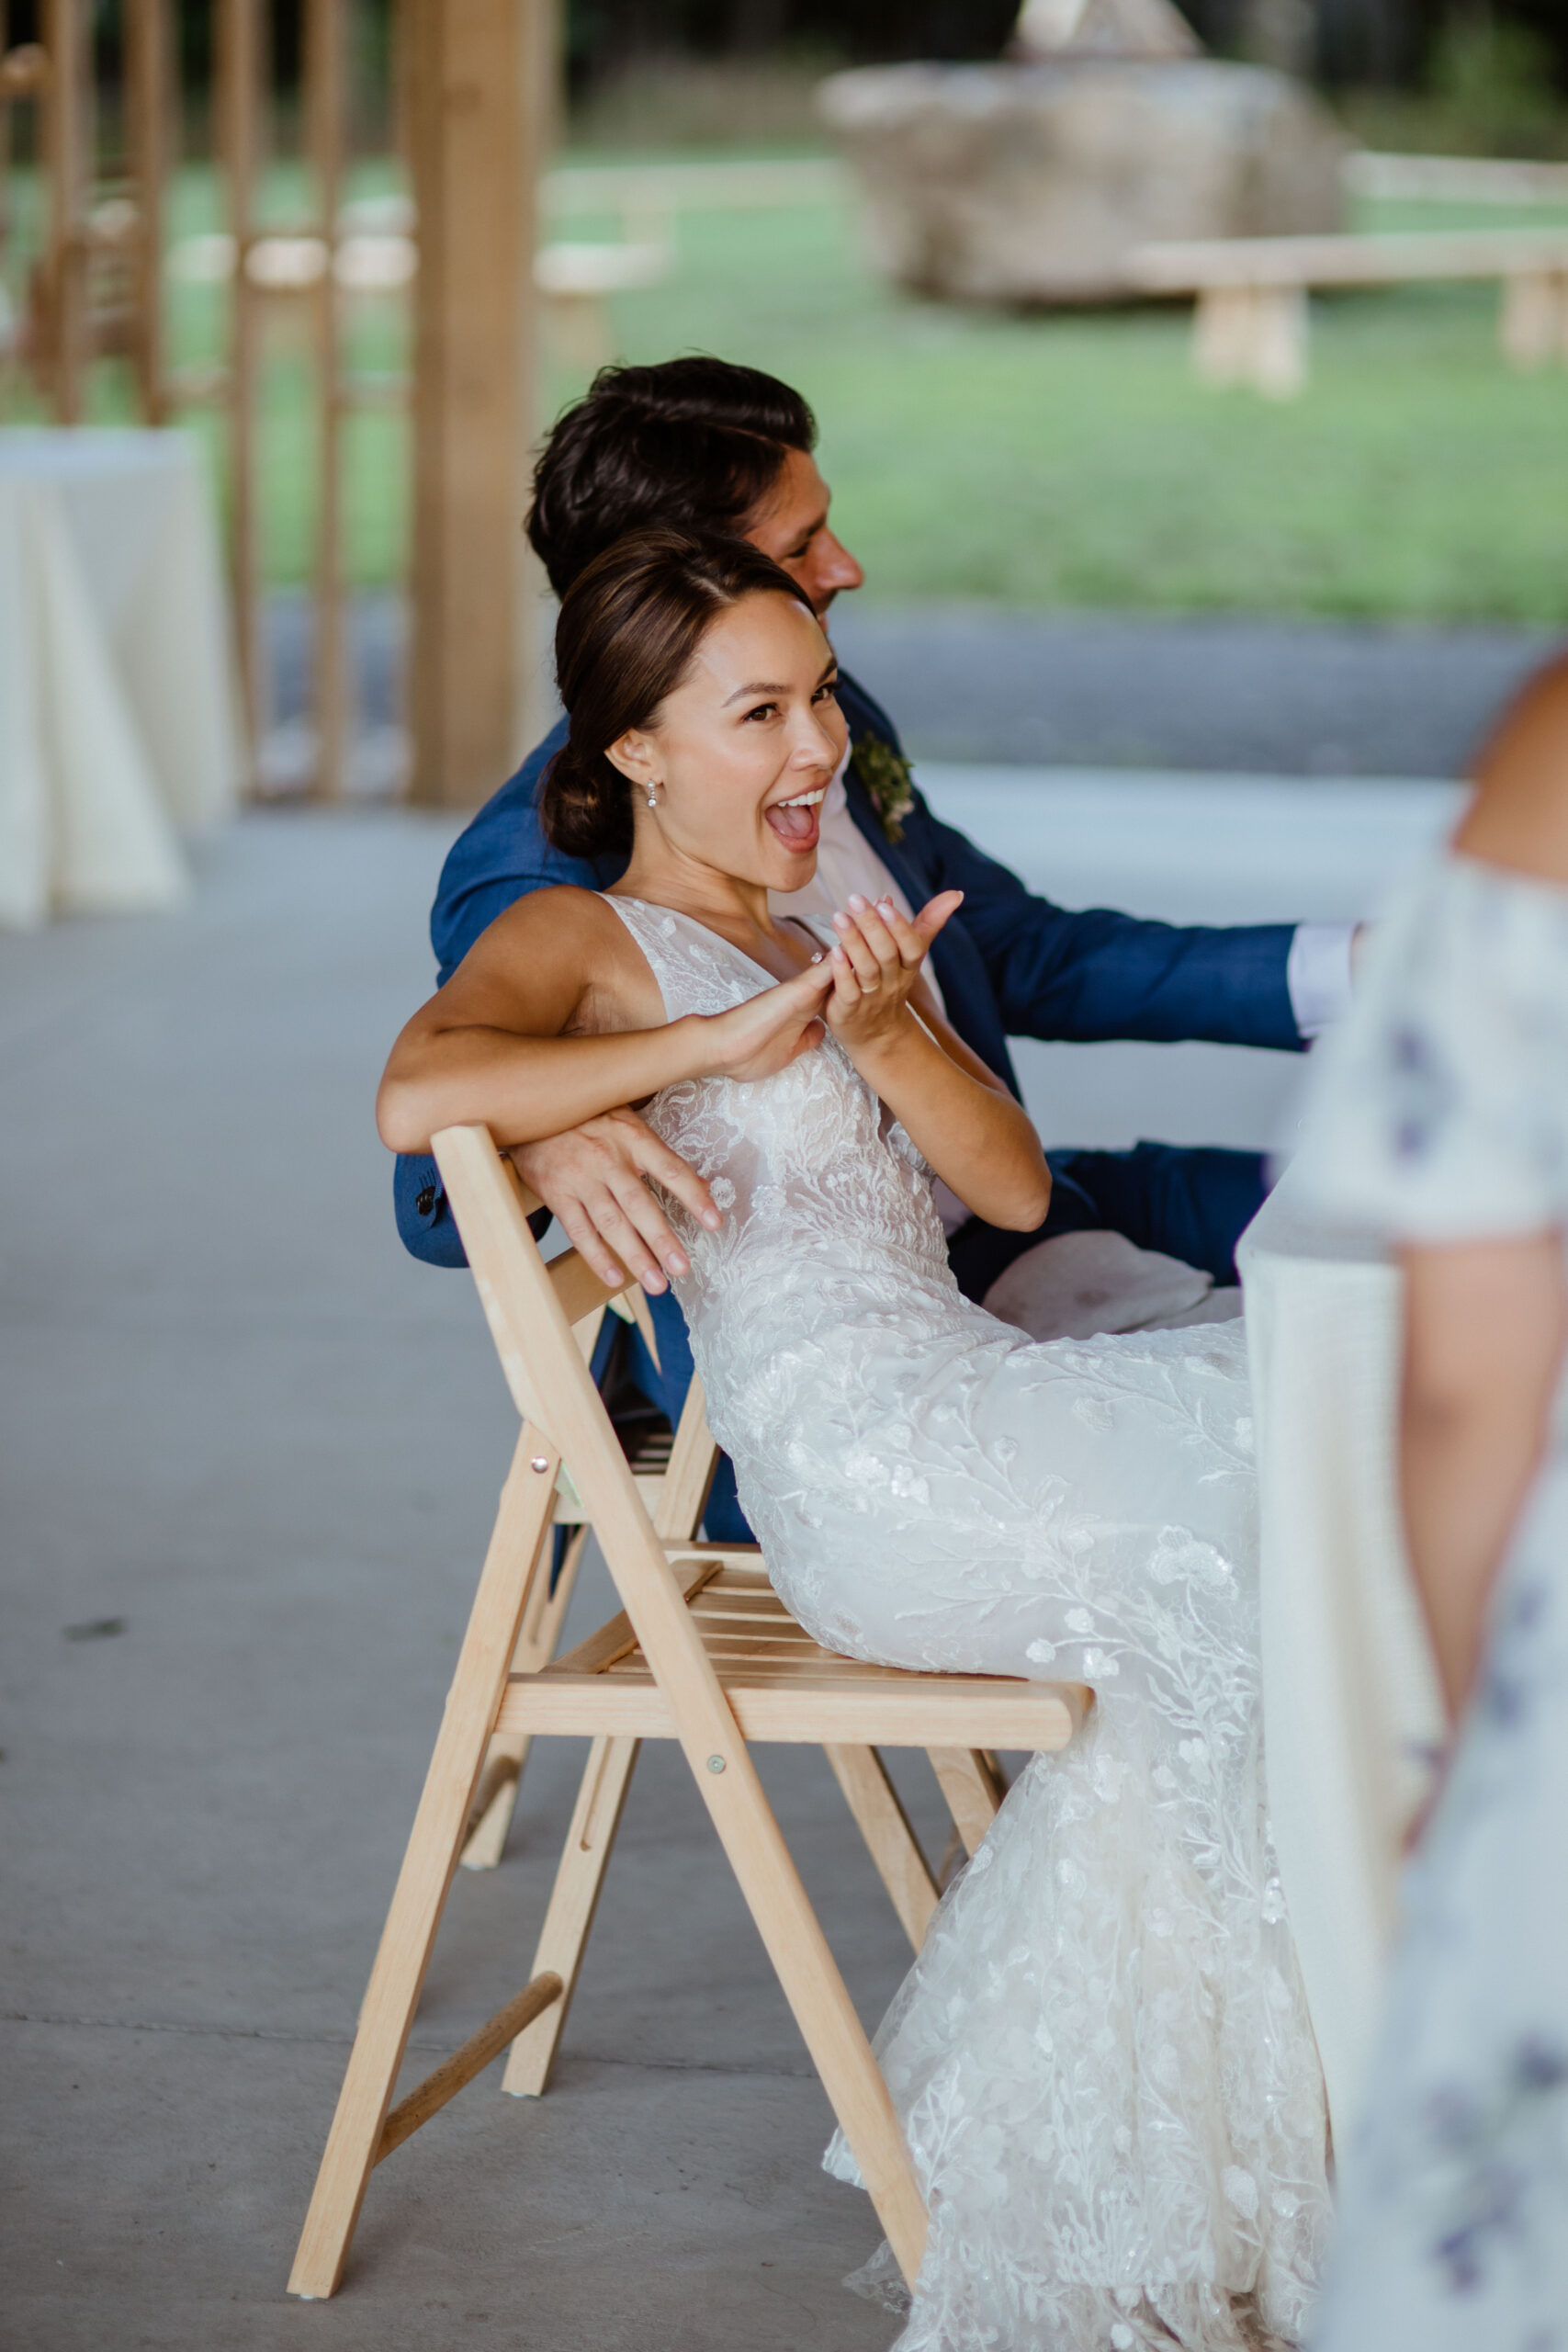 Stunning new bride and groom watch their guests celebrate during their modern Gather Greene wedding in Upstate New York